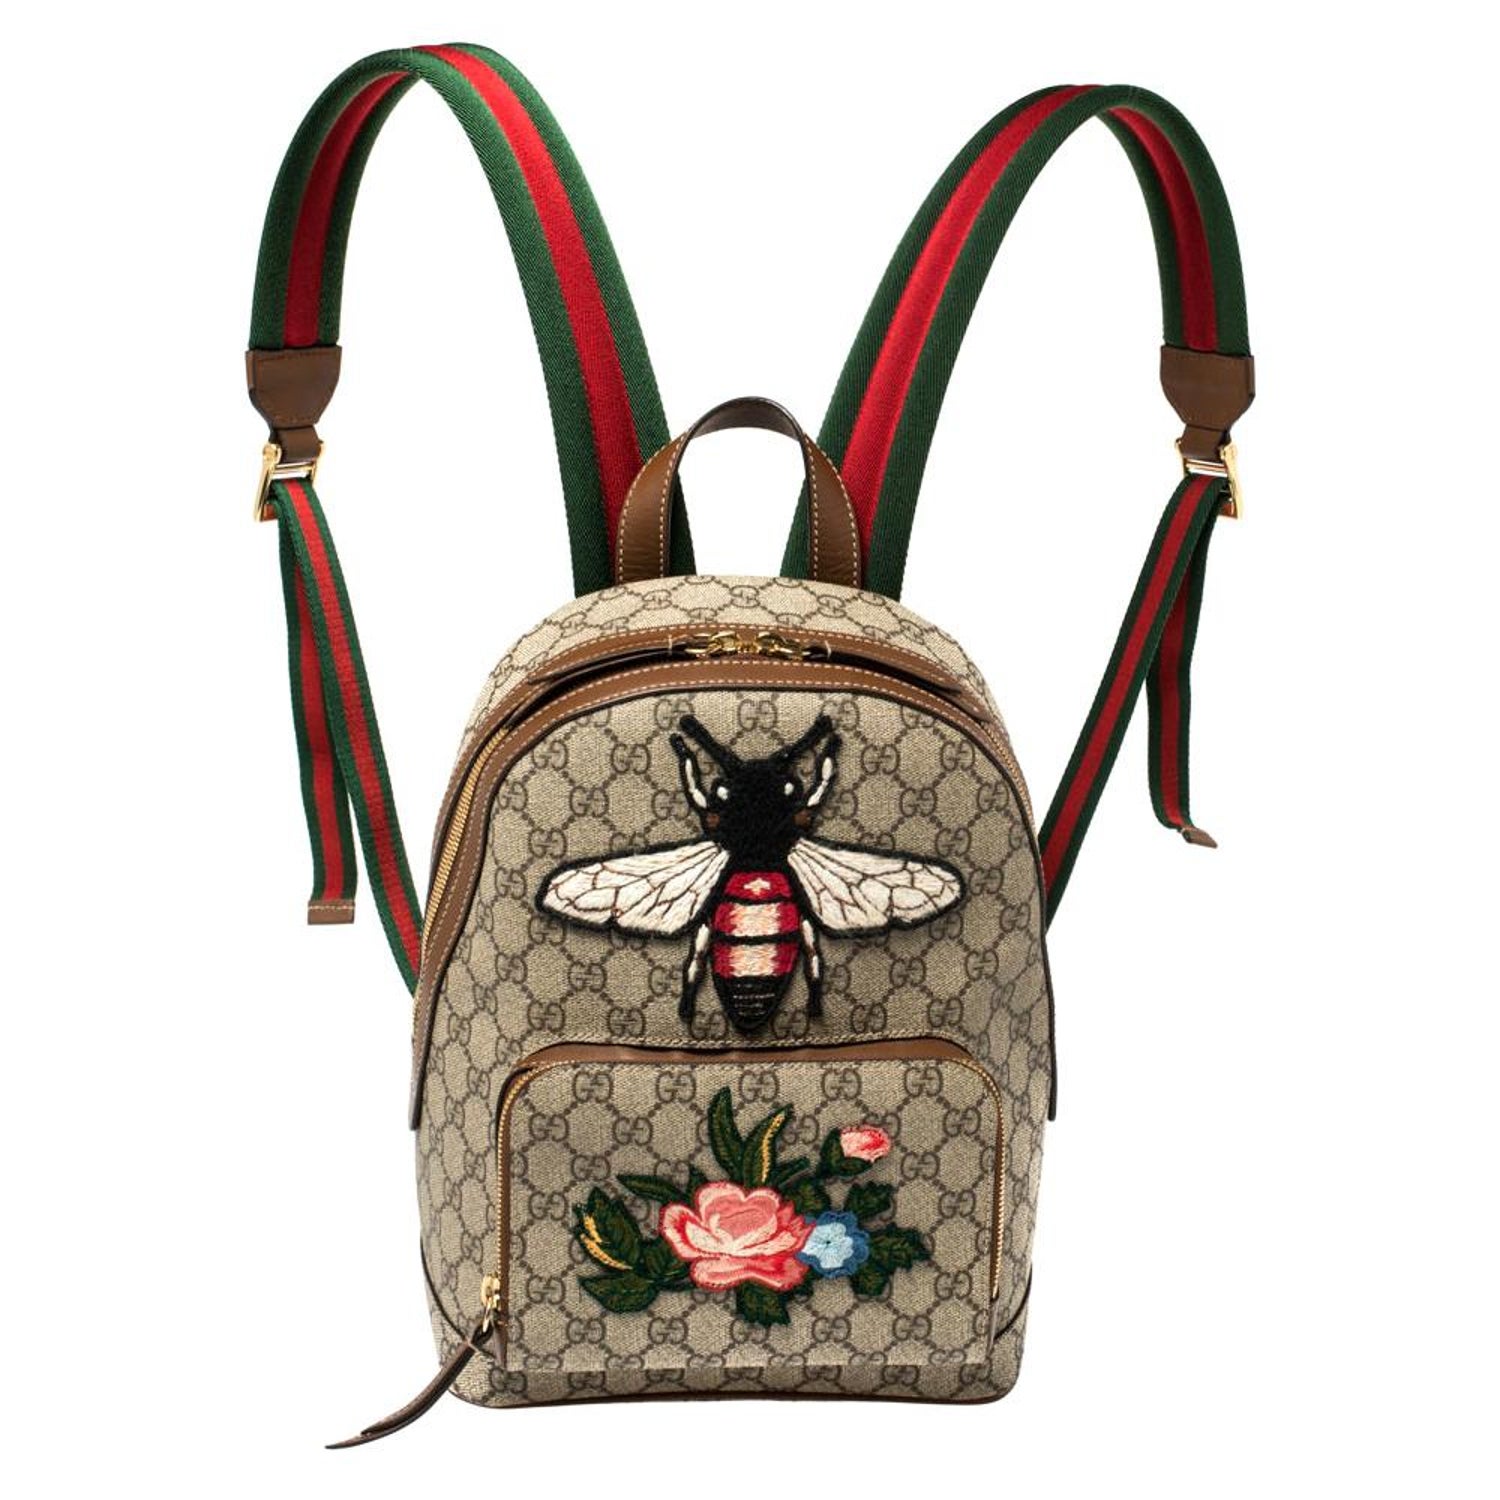 Floral Gucci Backpack - 3 For Sale on 1stDibs  black gucci backpack with  red and green strap, gucci floral backpack, gucci backpack red and green  straps